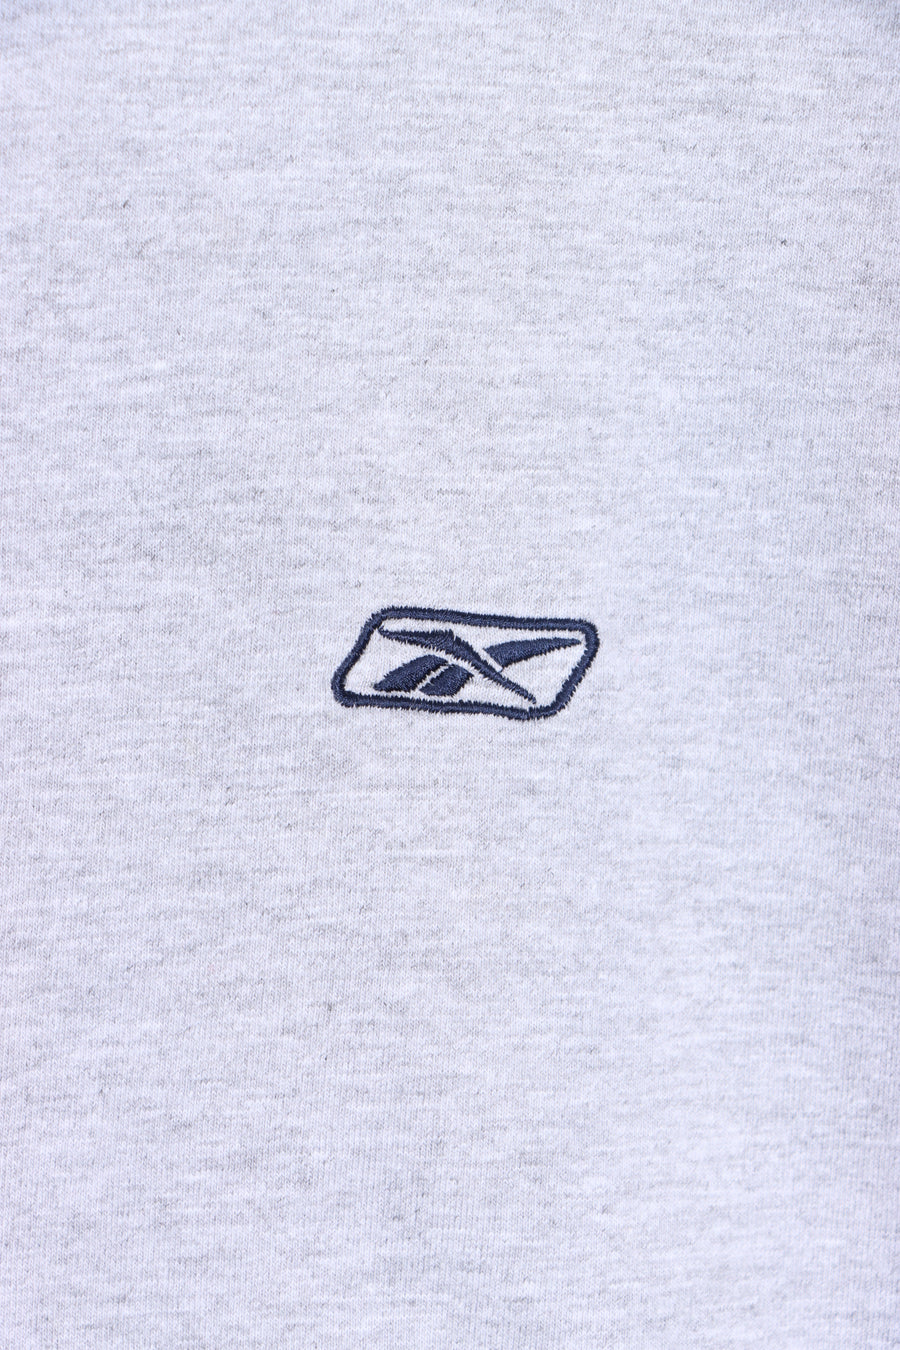 REEBOK Embroidered Logo Casual Grey T-Shirt (L)